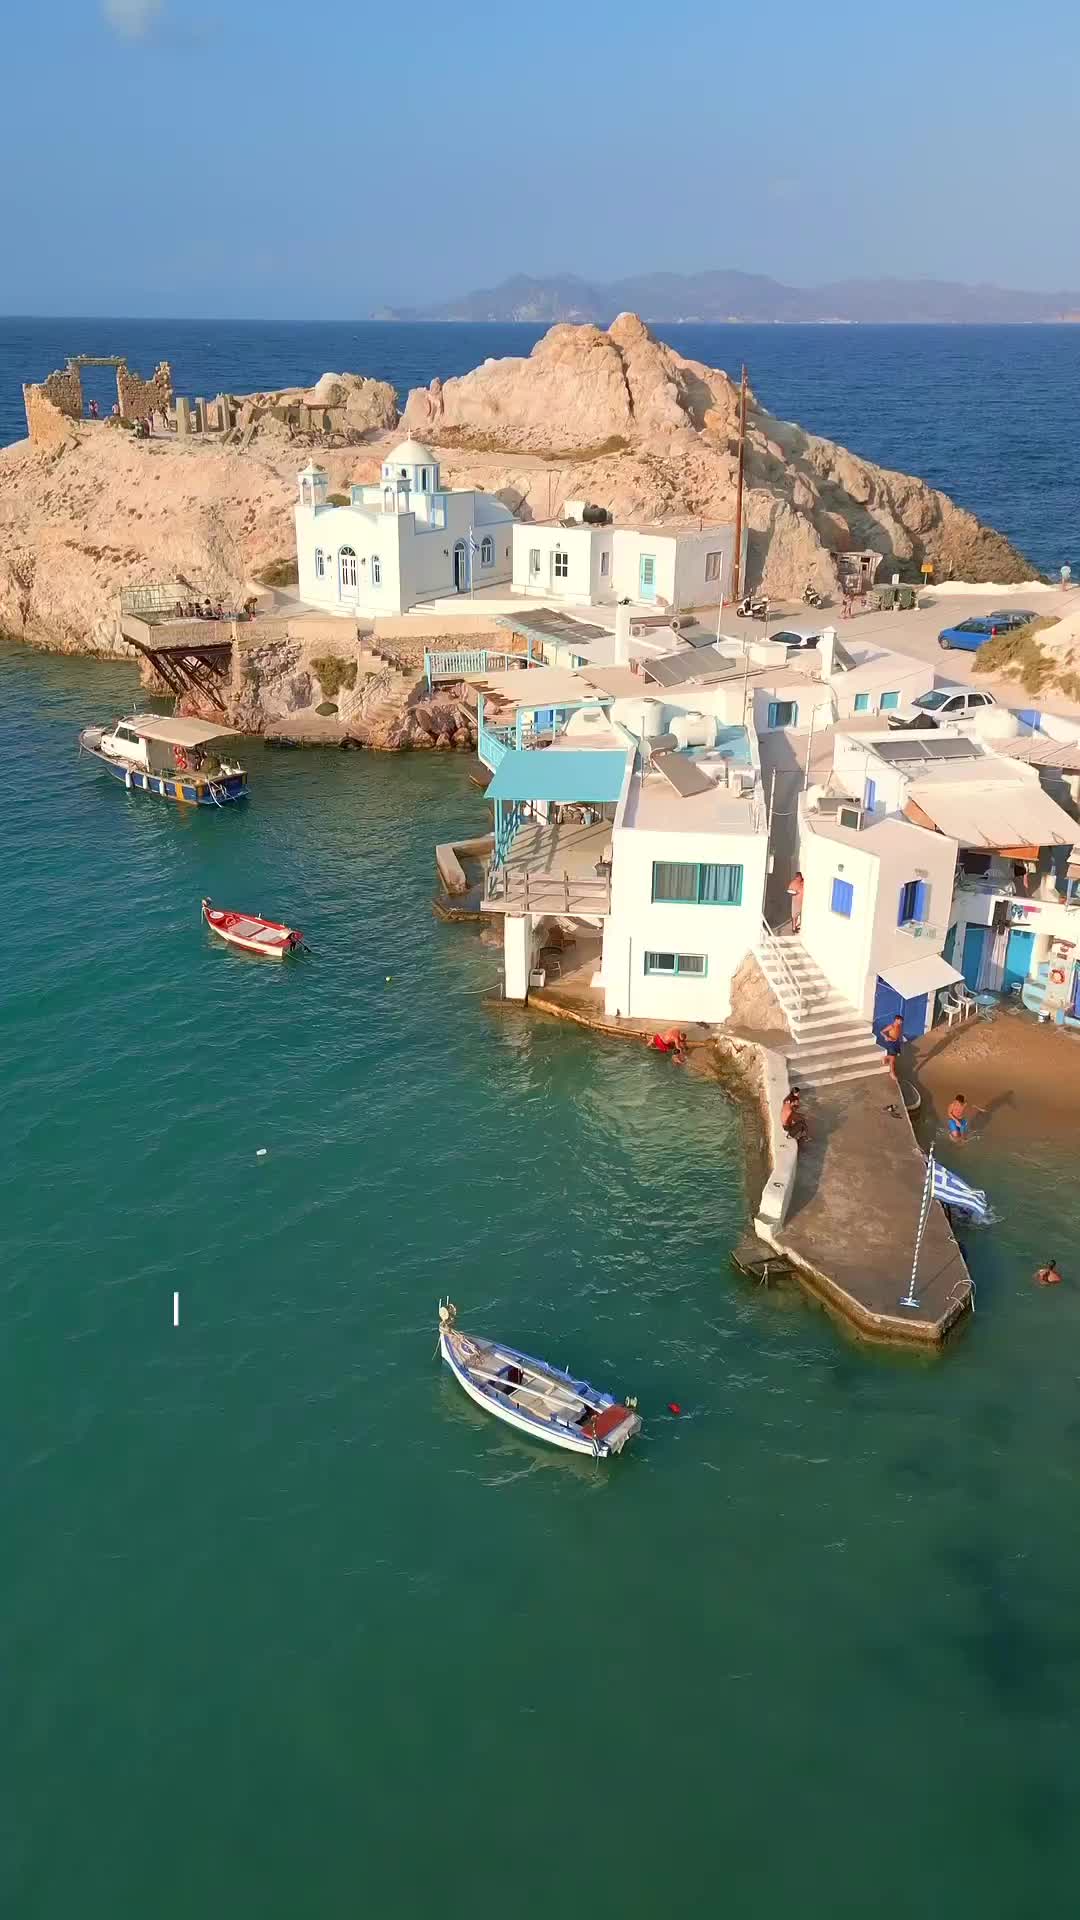 Discover Firopotamos: Milos' Secluded Fishing Village